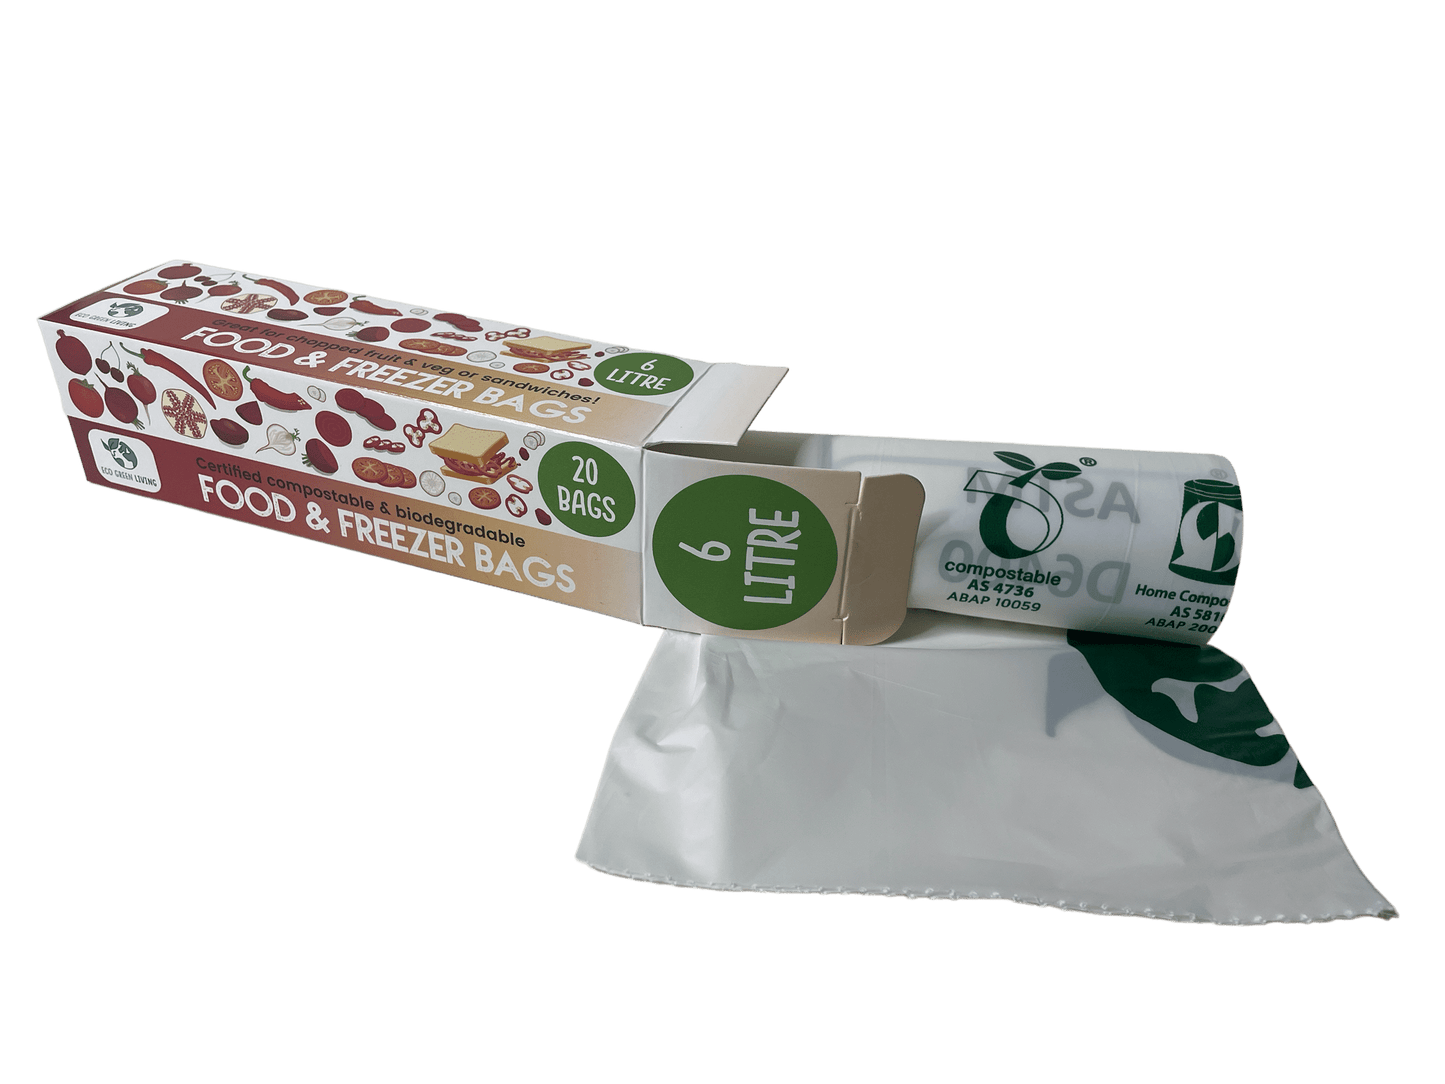 6 Litre Certified Compostable Food & Freezer Bags (20 bags)